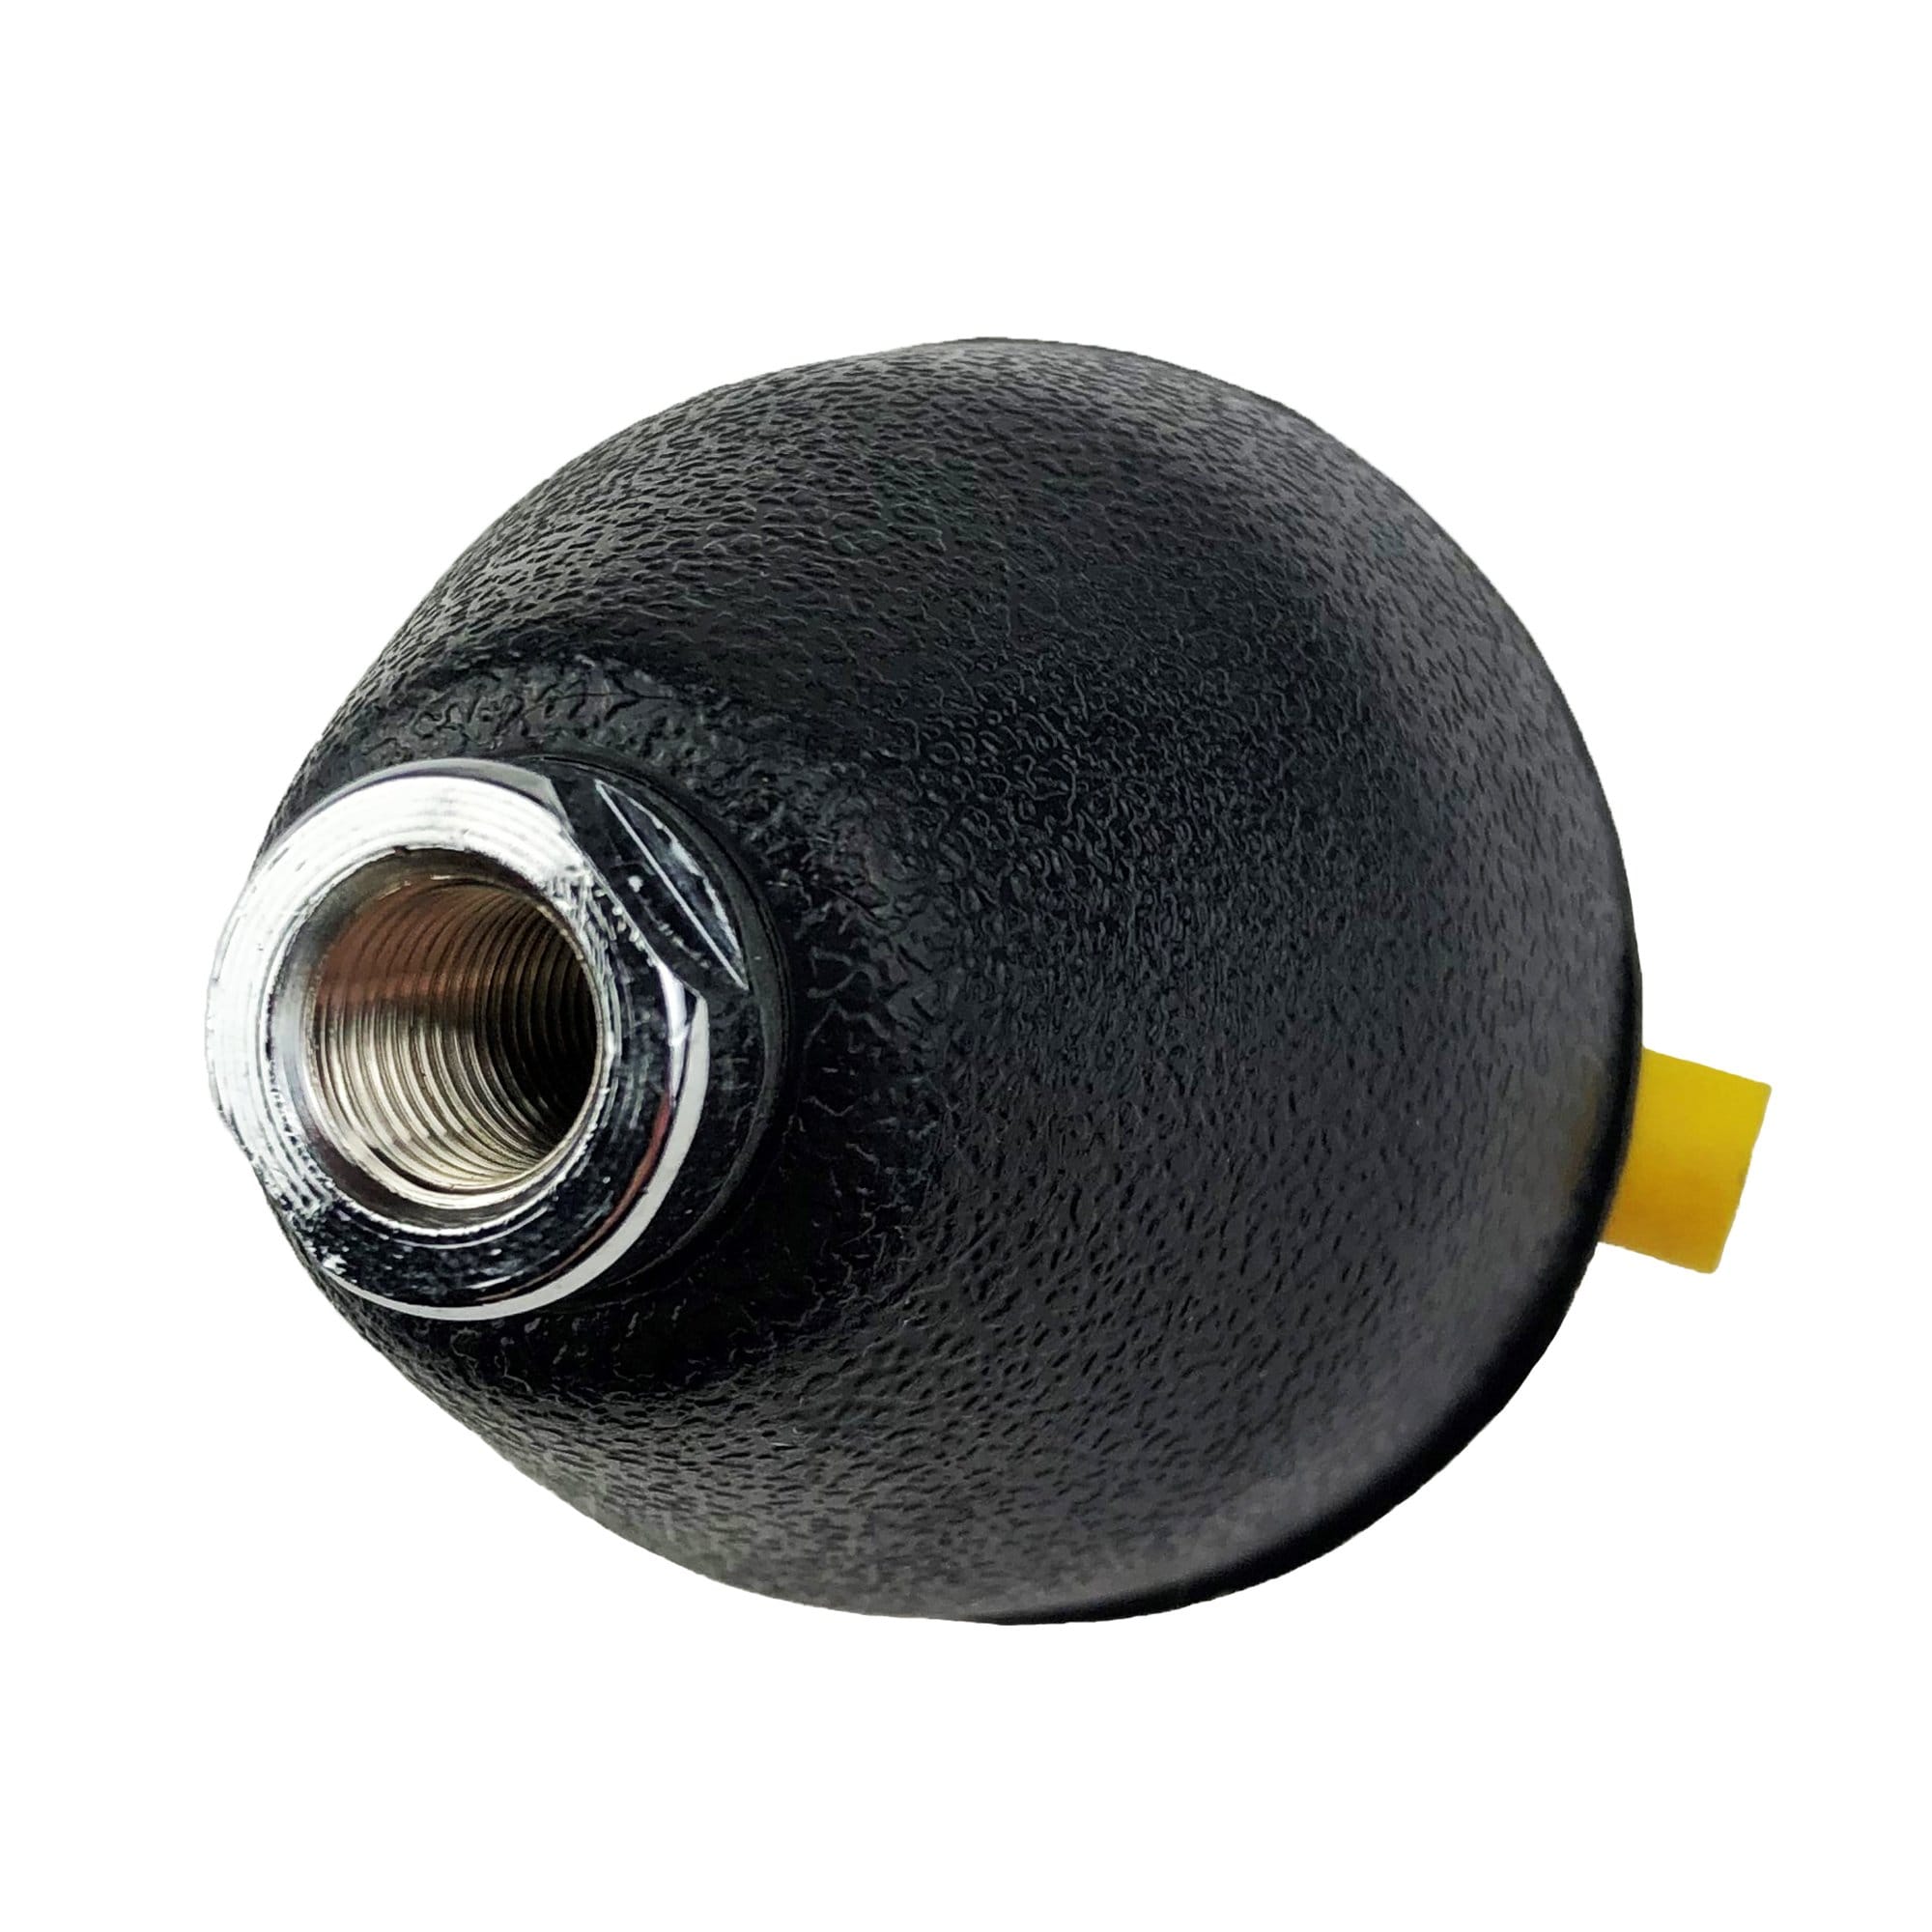 Opek HDM-2B Threaded Trunk or Roof Hole Type Mobile Antenna Mount with Ring Terminal Connection